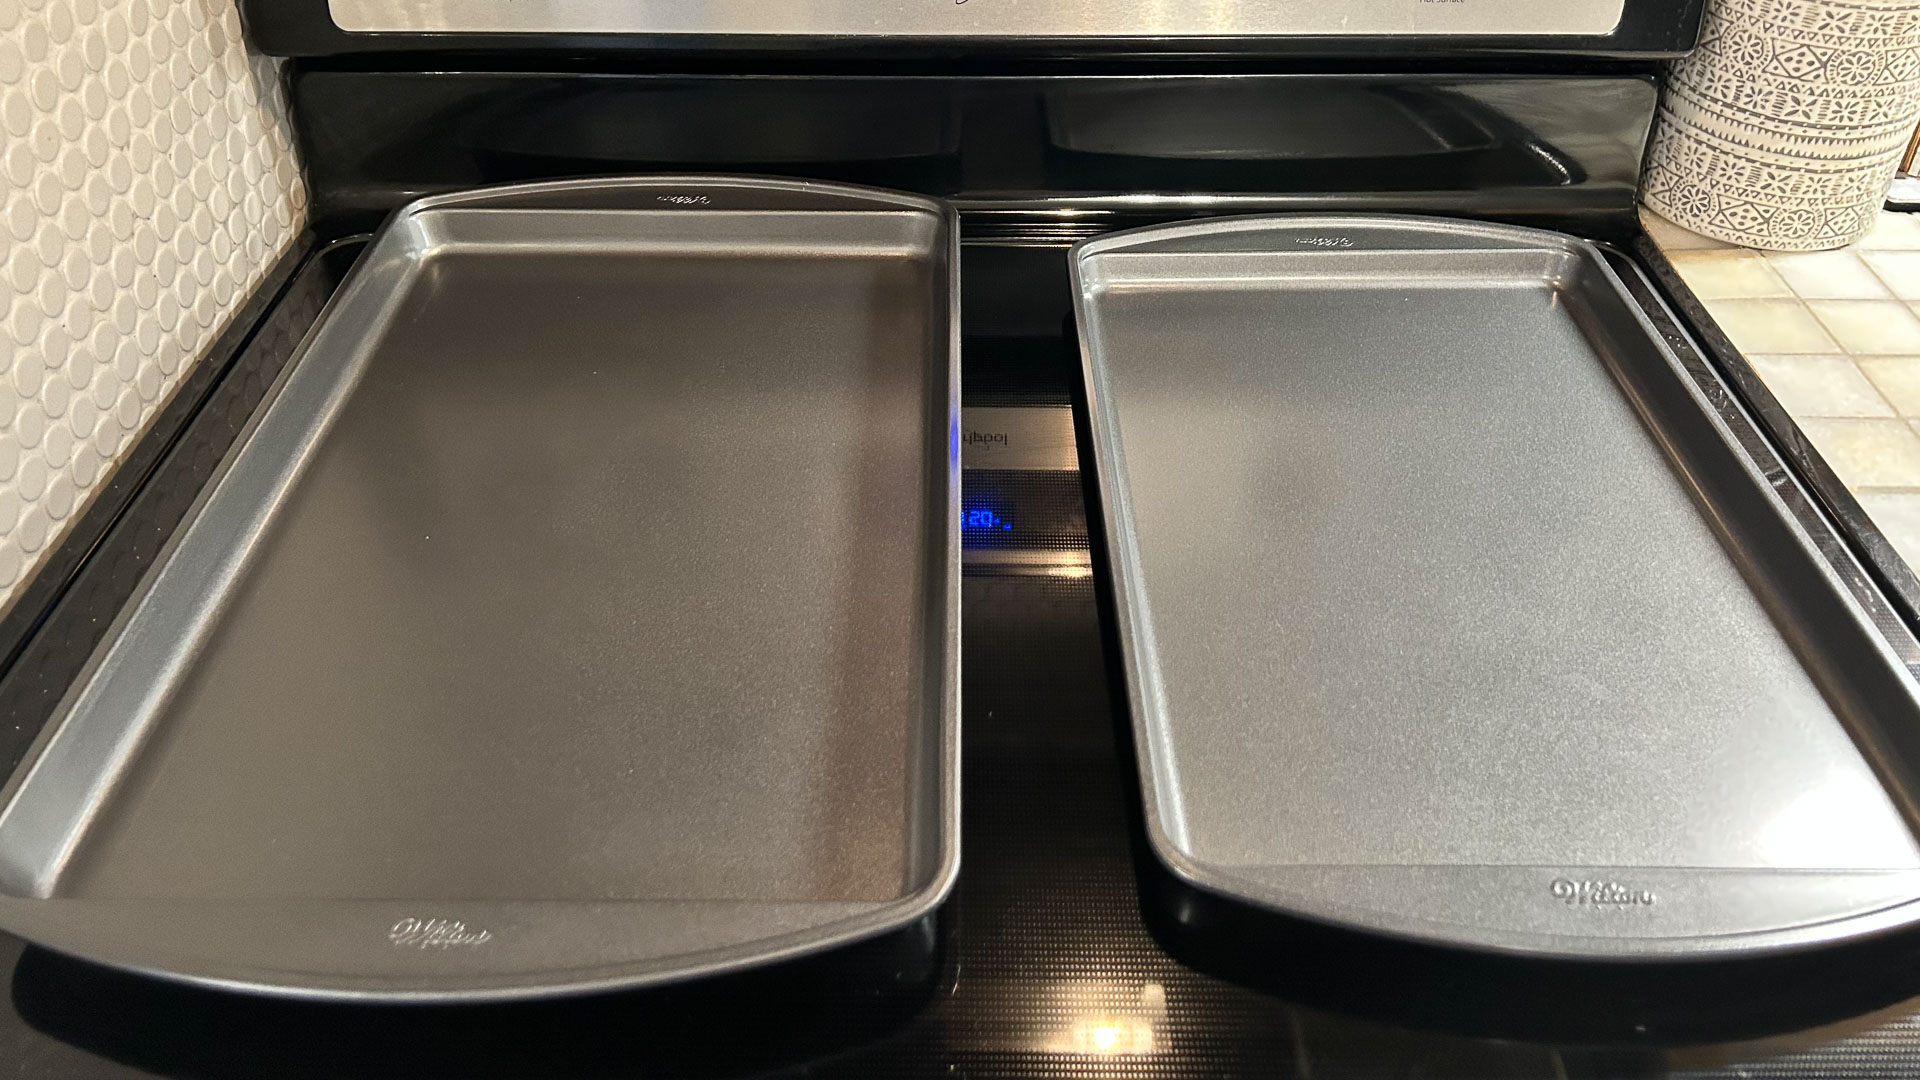 https://staging.dontwasteyourmoney.com/wp-content/uploads/2023/05/cookie-sheet-wilton-non-stick-dishwasher-safe-cookie-sheets-2-piece-review-ub-1.jpg